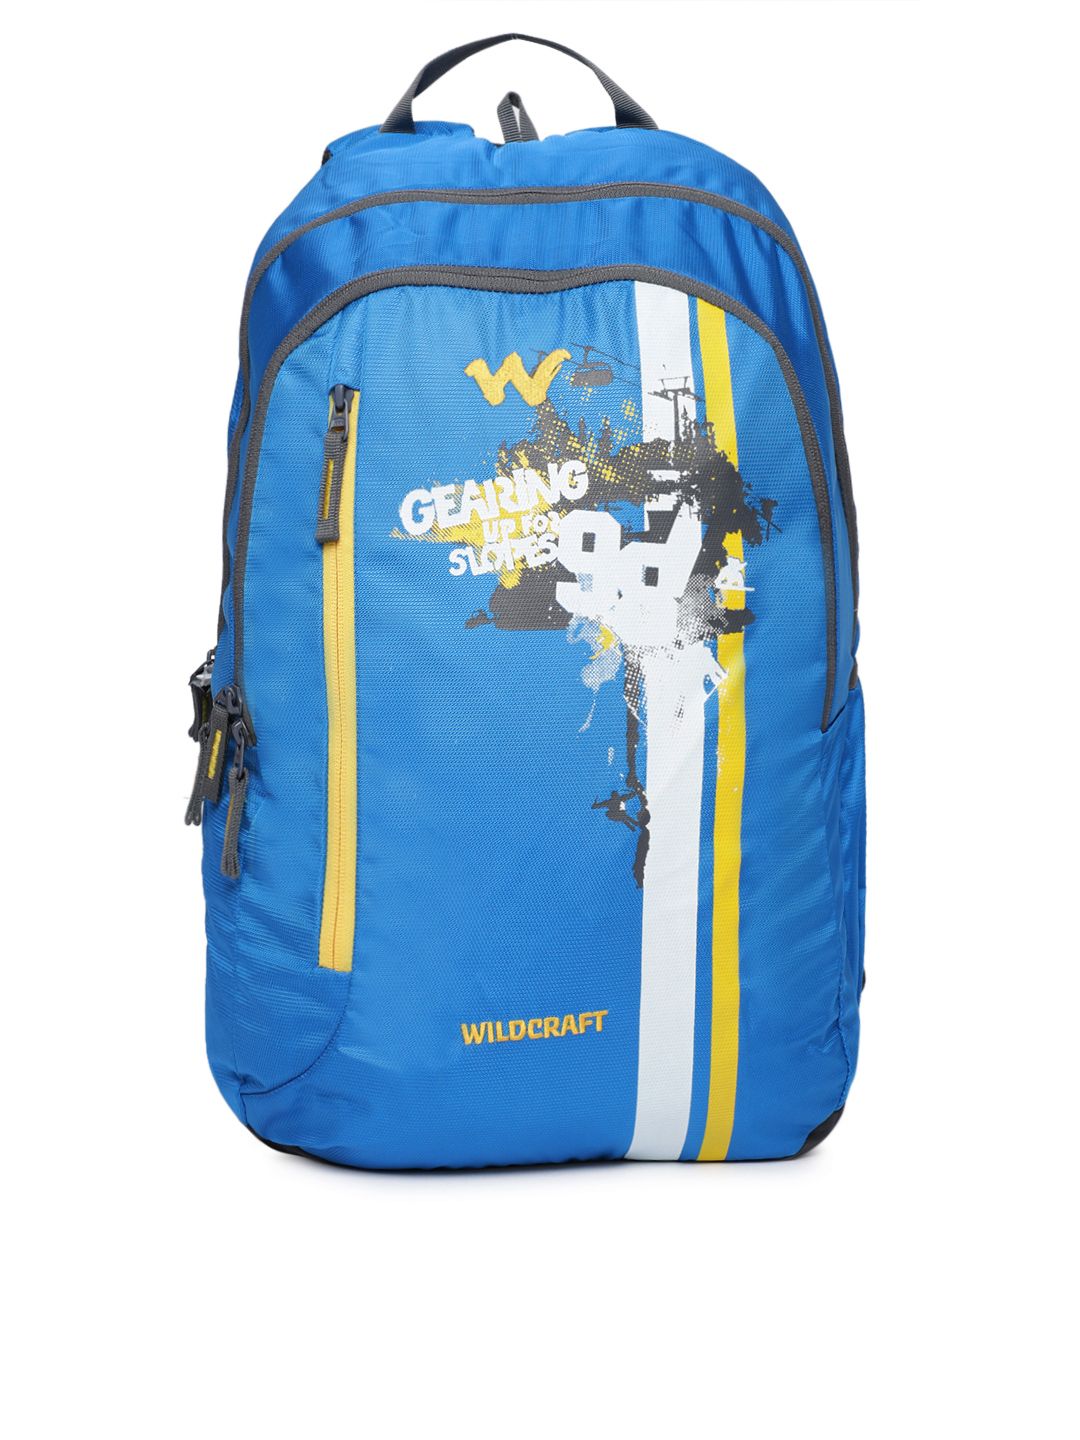 Wildcraft Unisex Blue Graphic Backpack Price in India